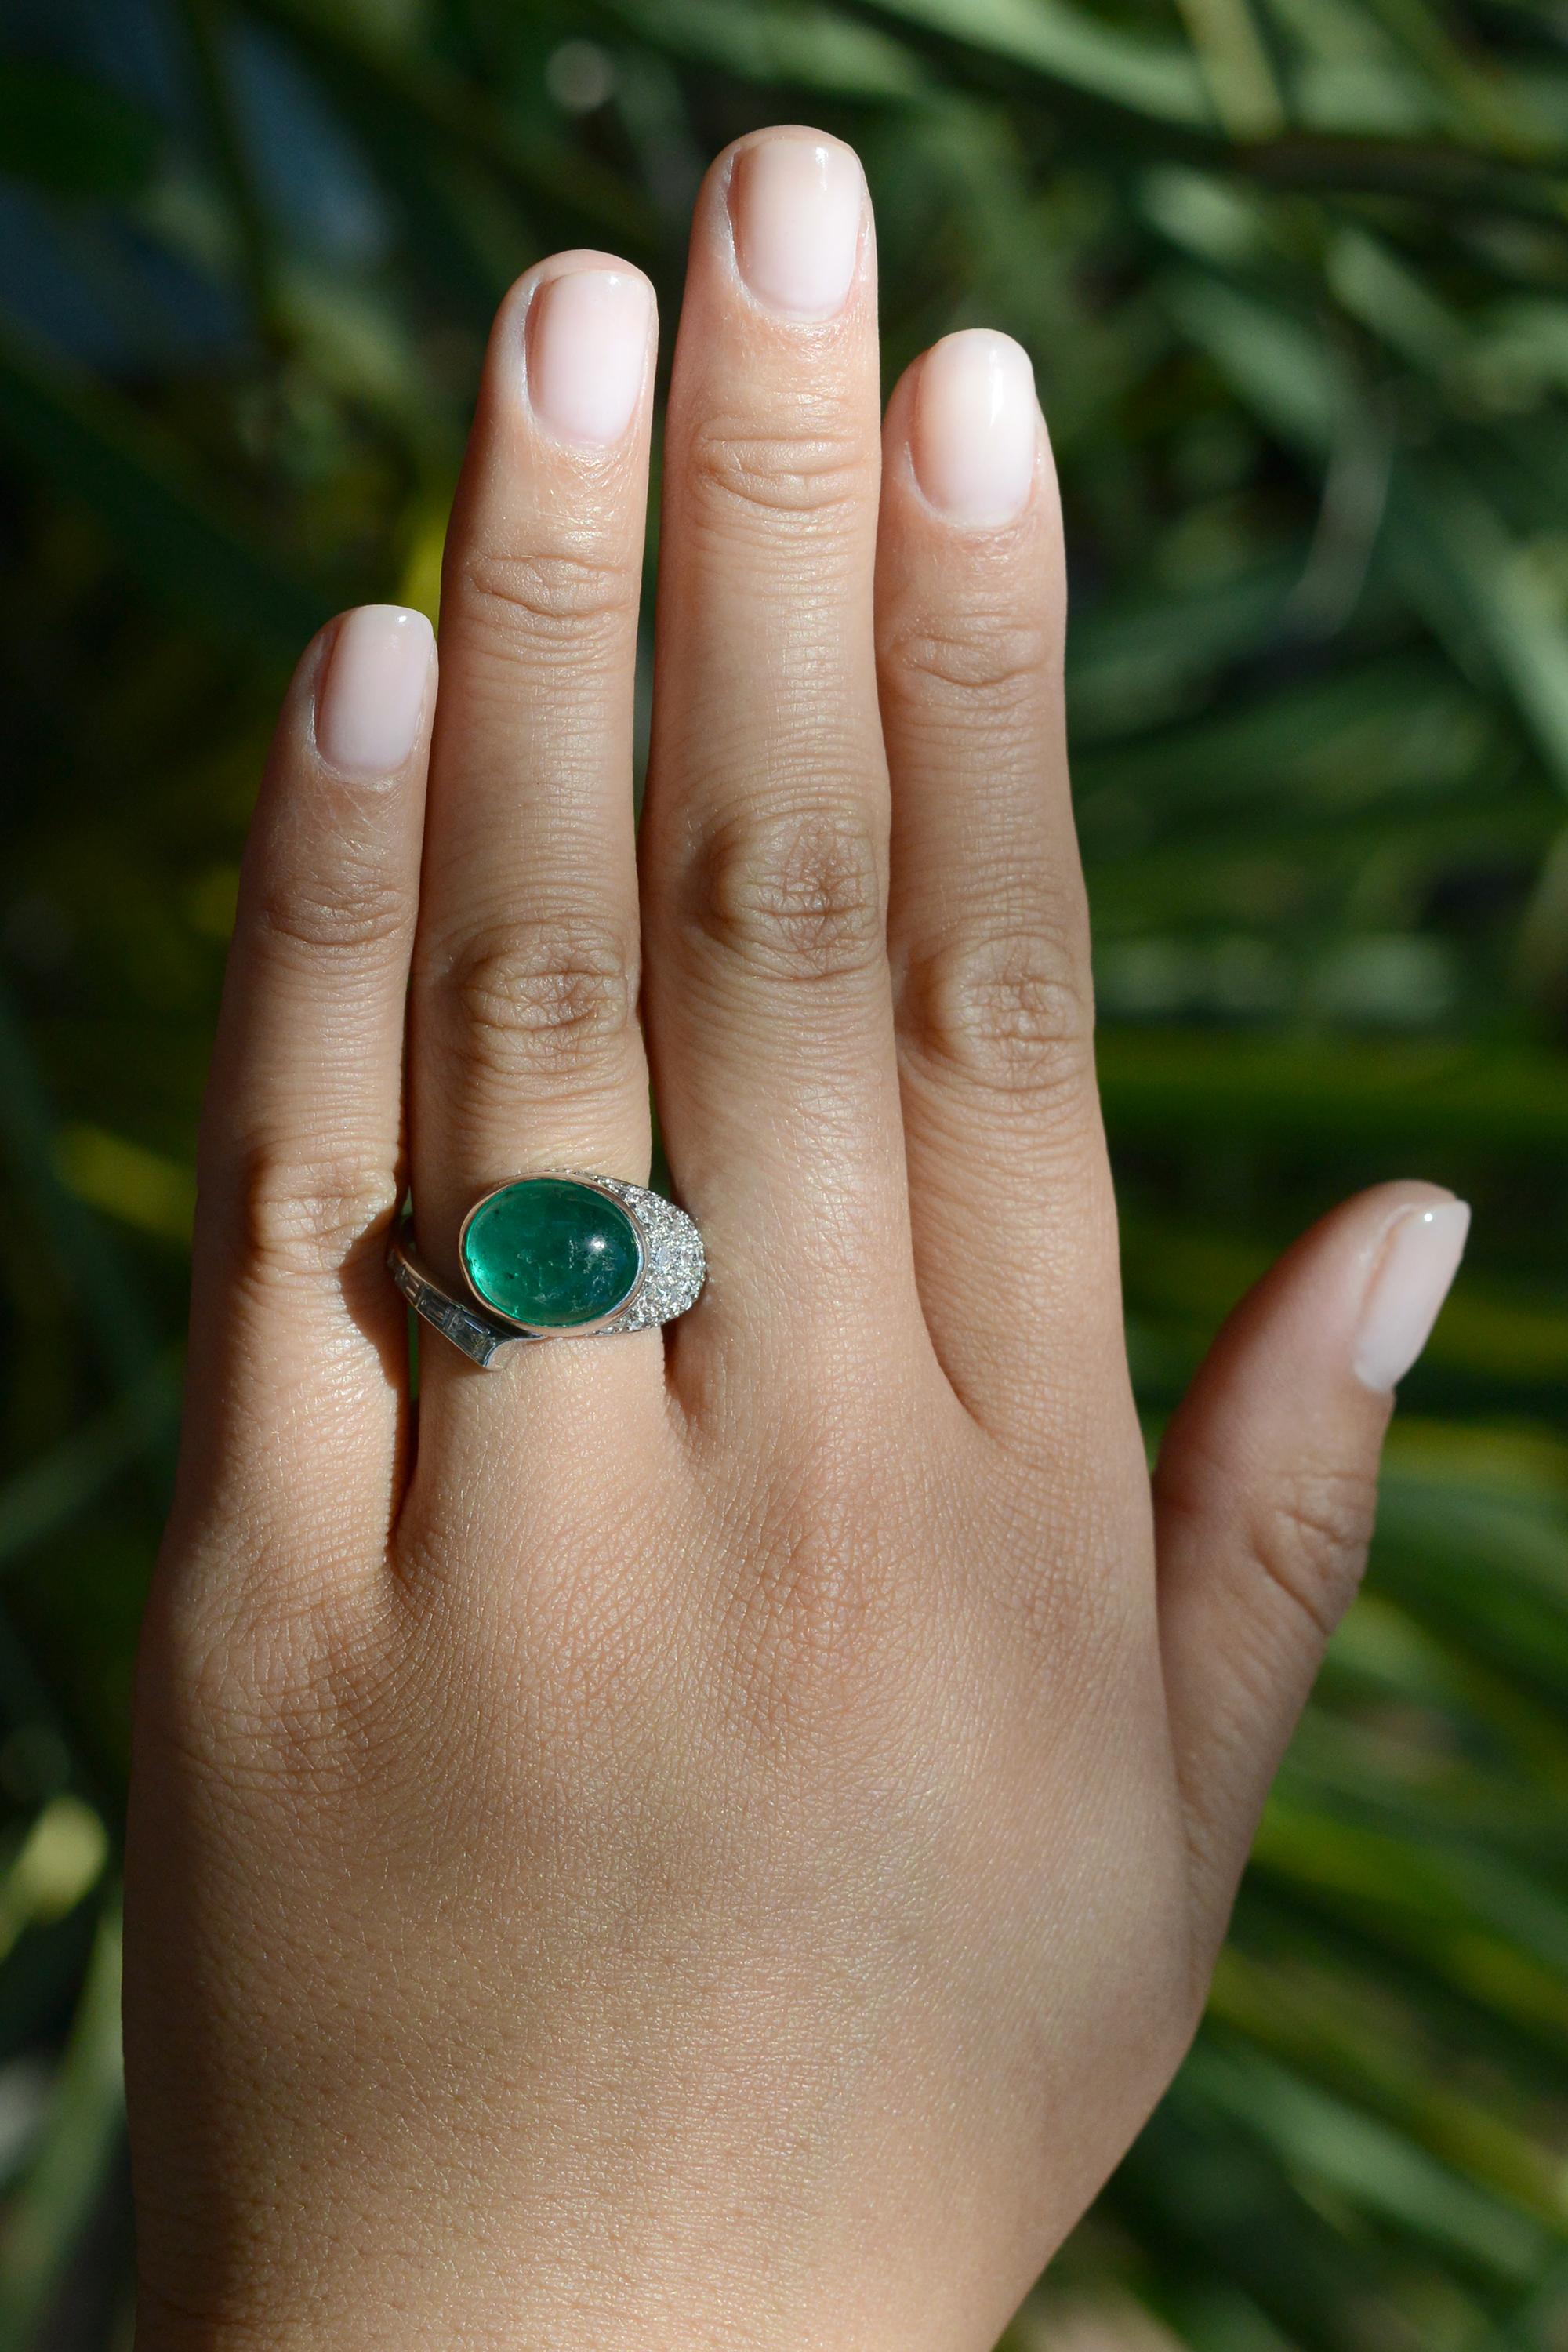 Be transported back to the luxurious glamour of the roaring twenties with this authentic Art Deco ring. Crafted with a unique asymmetrical platinum setting, this ring features a glowing 6.07 carat cabochon Colombian emerald, accented with antique